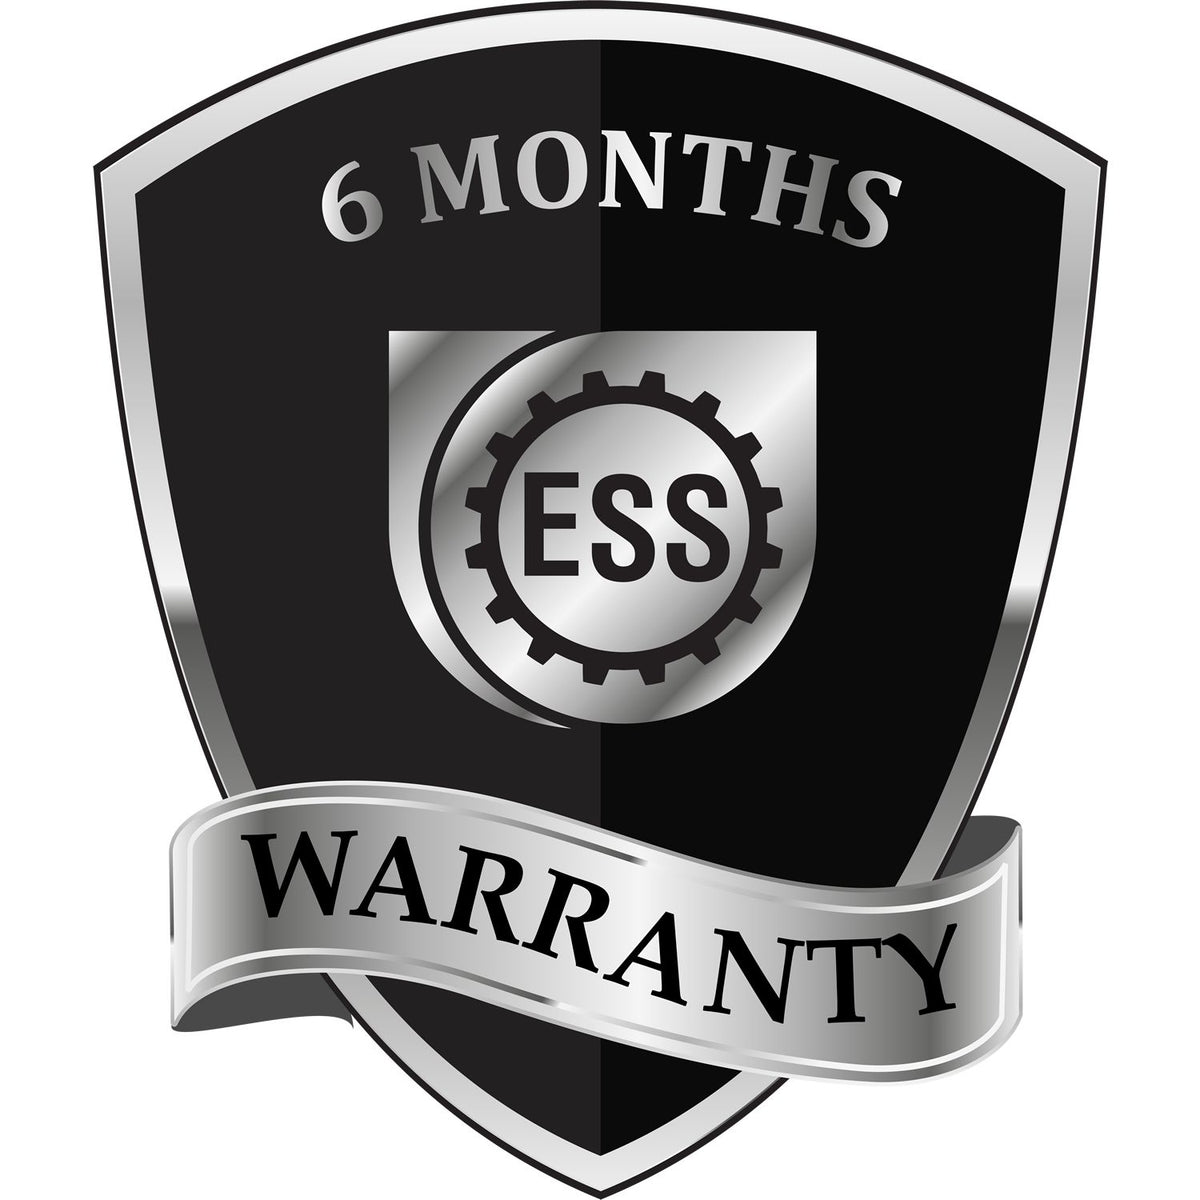 A badge or emblem showing a warranty icon for the Tennessee Professional Engineer Seal Stamp